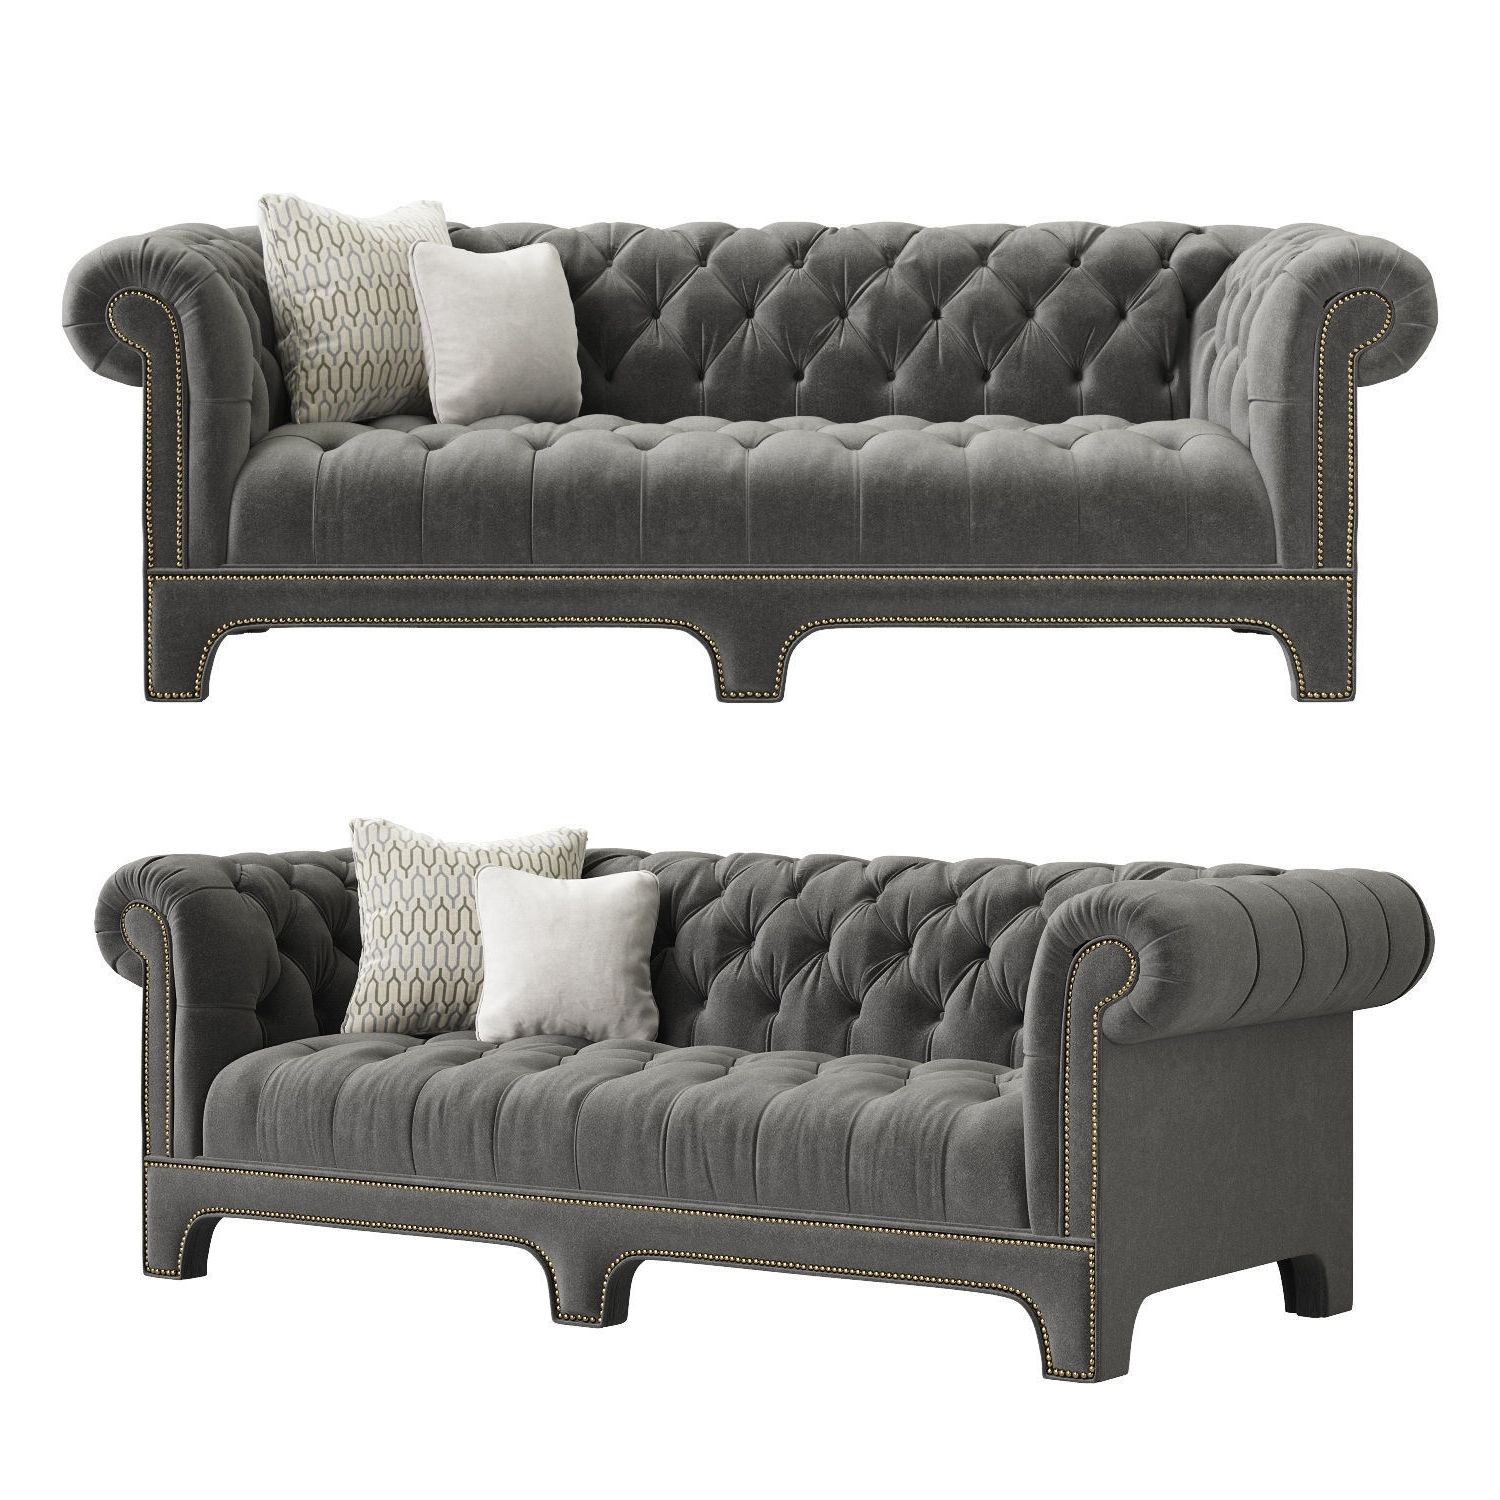 Popular Claudette Sofa – Mitchell Gold Bob Williams 3d Model Max Fbx Intended For Mitchell Gold Sofas (Photo 1 of 15)